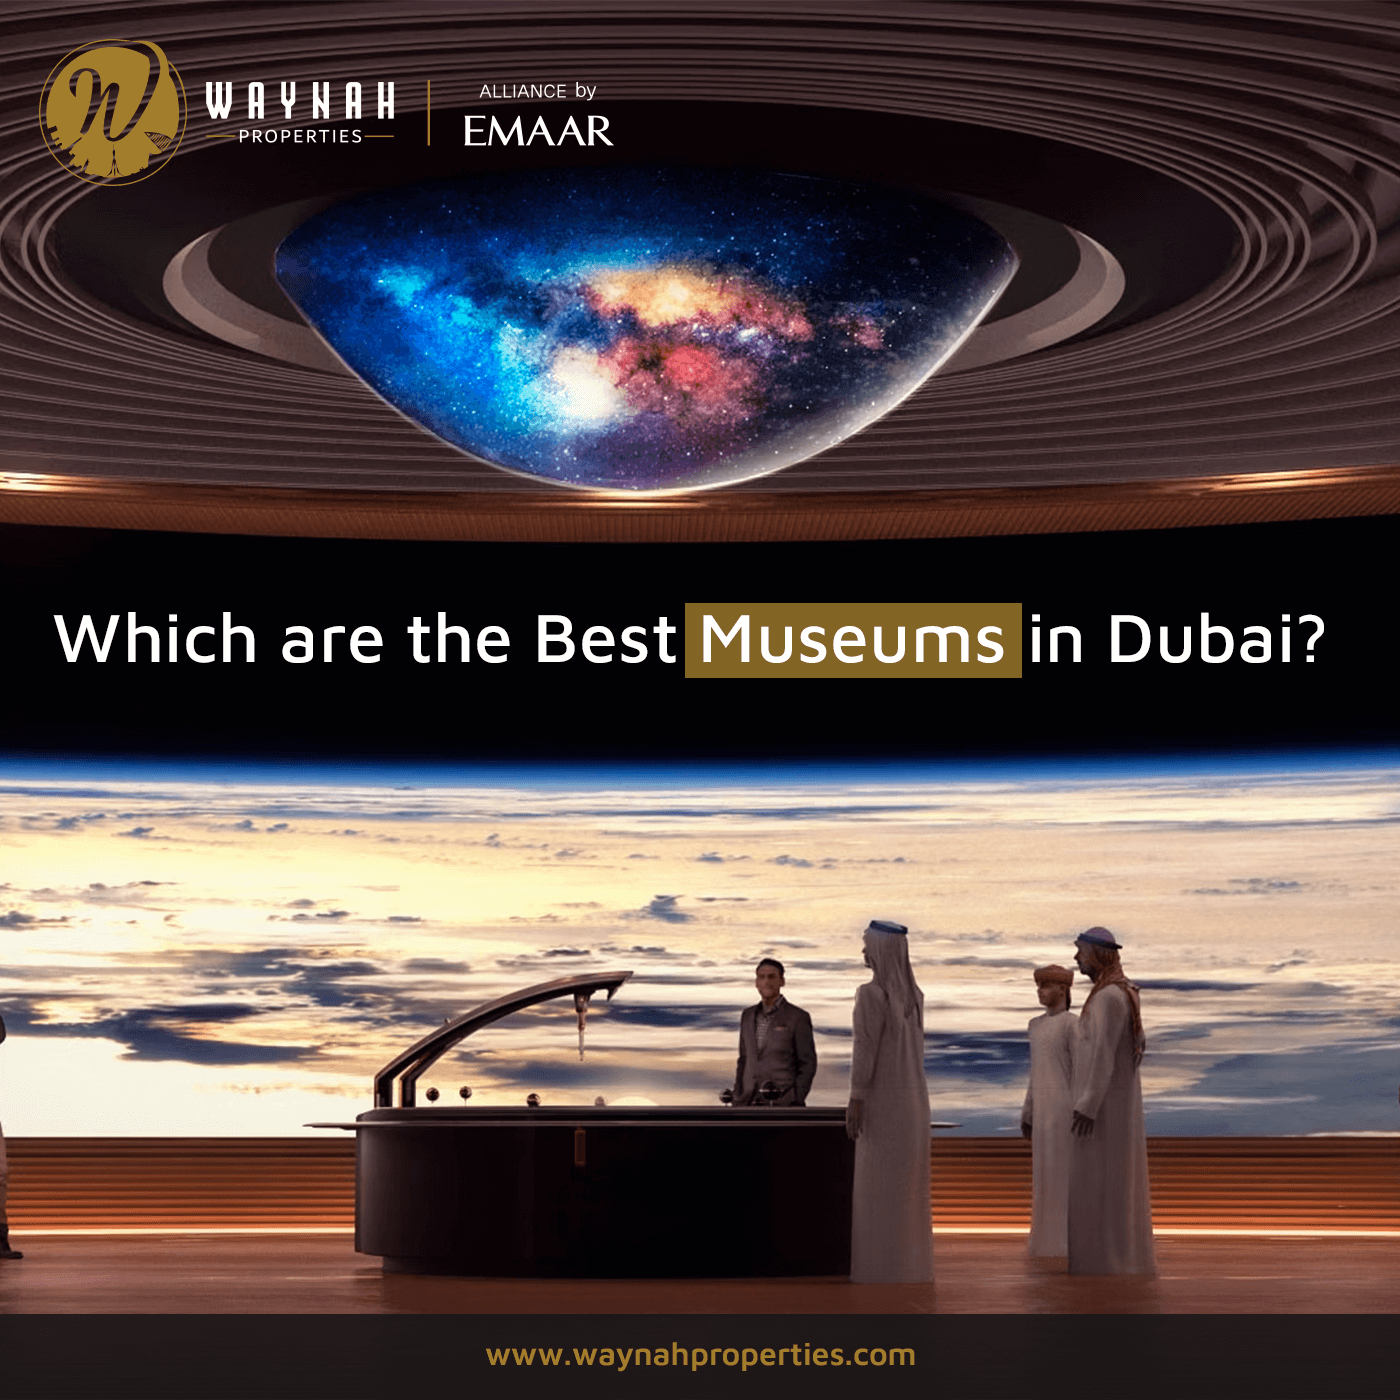 Which are the best museums in Dubai?